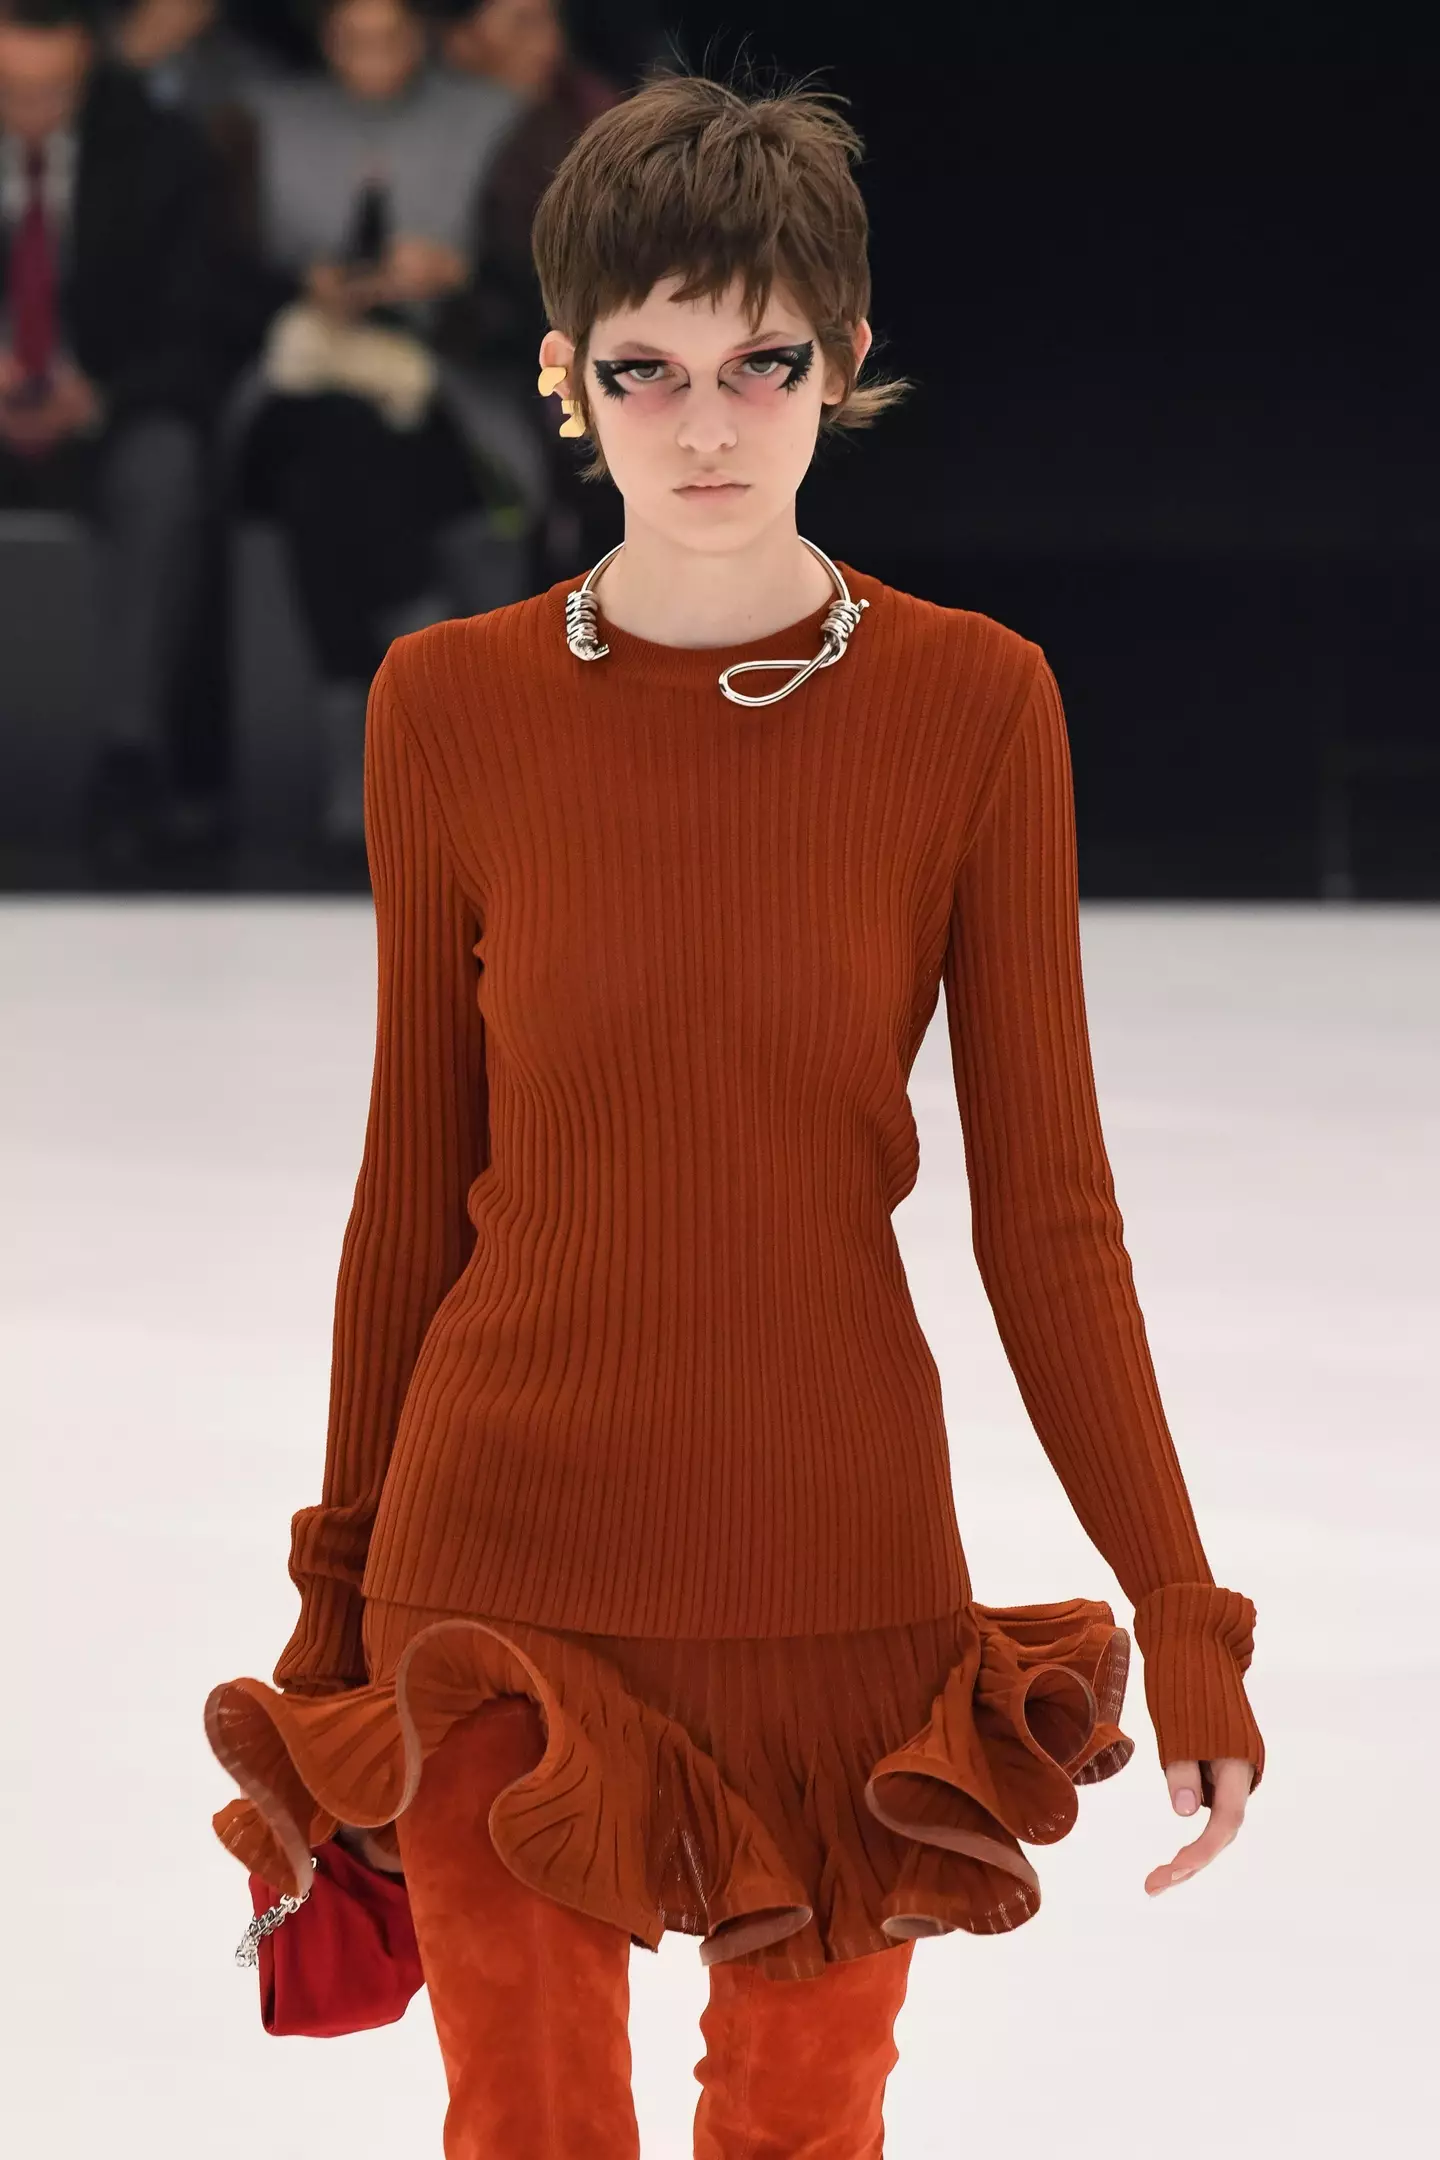 A model wearing the controversial necklace at the Givenchy womenswear spring/summer 2022 show.